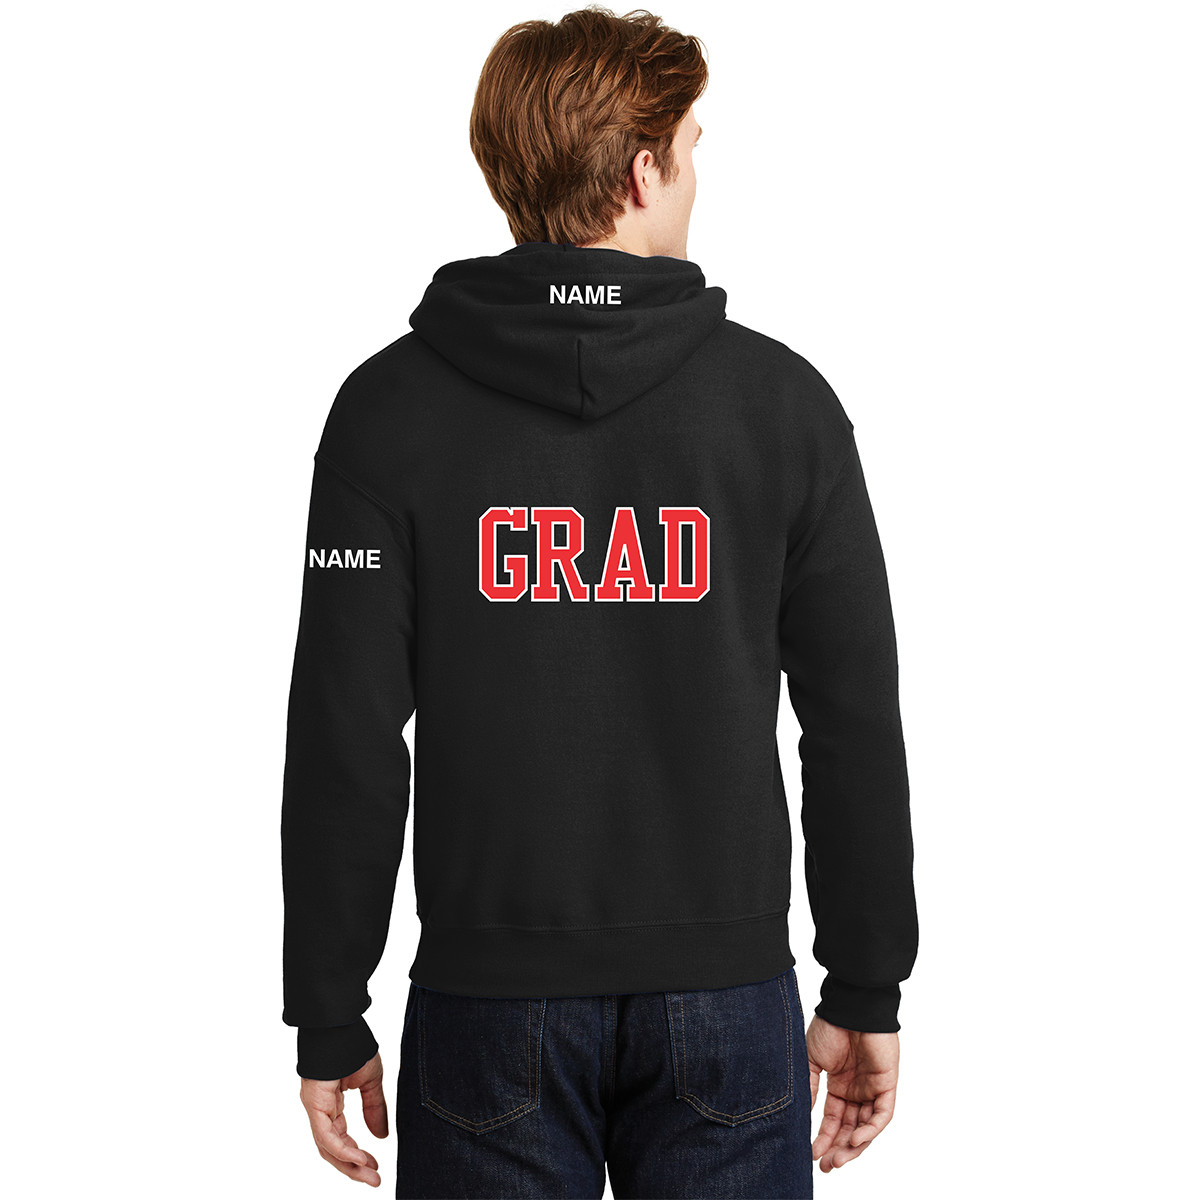 St. Christopher Cougars Class of 2024 Gradhoodie Embroidered STCC